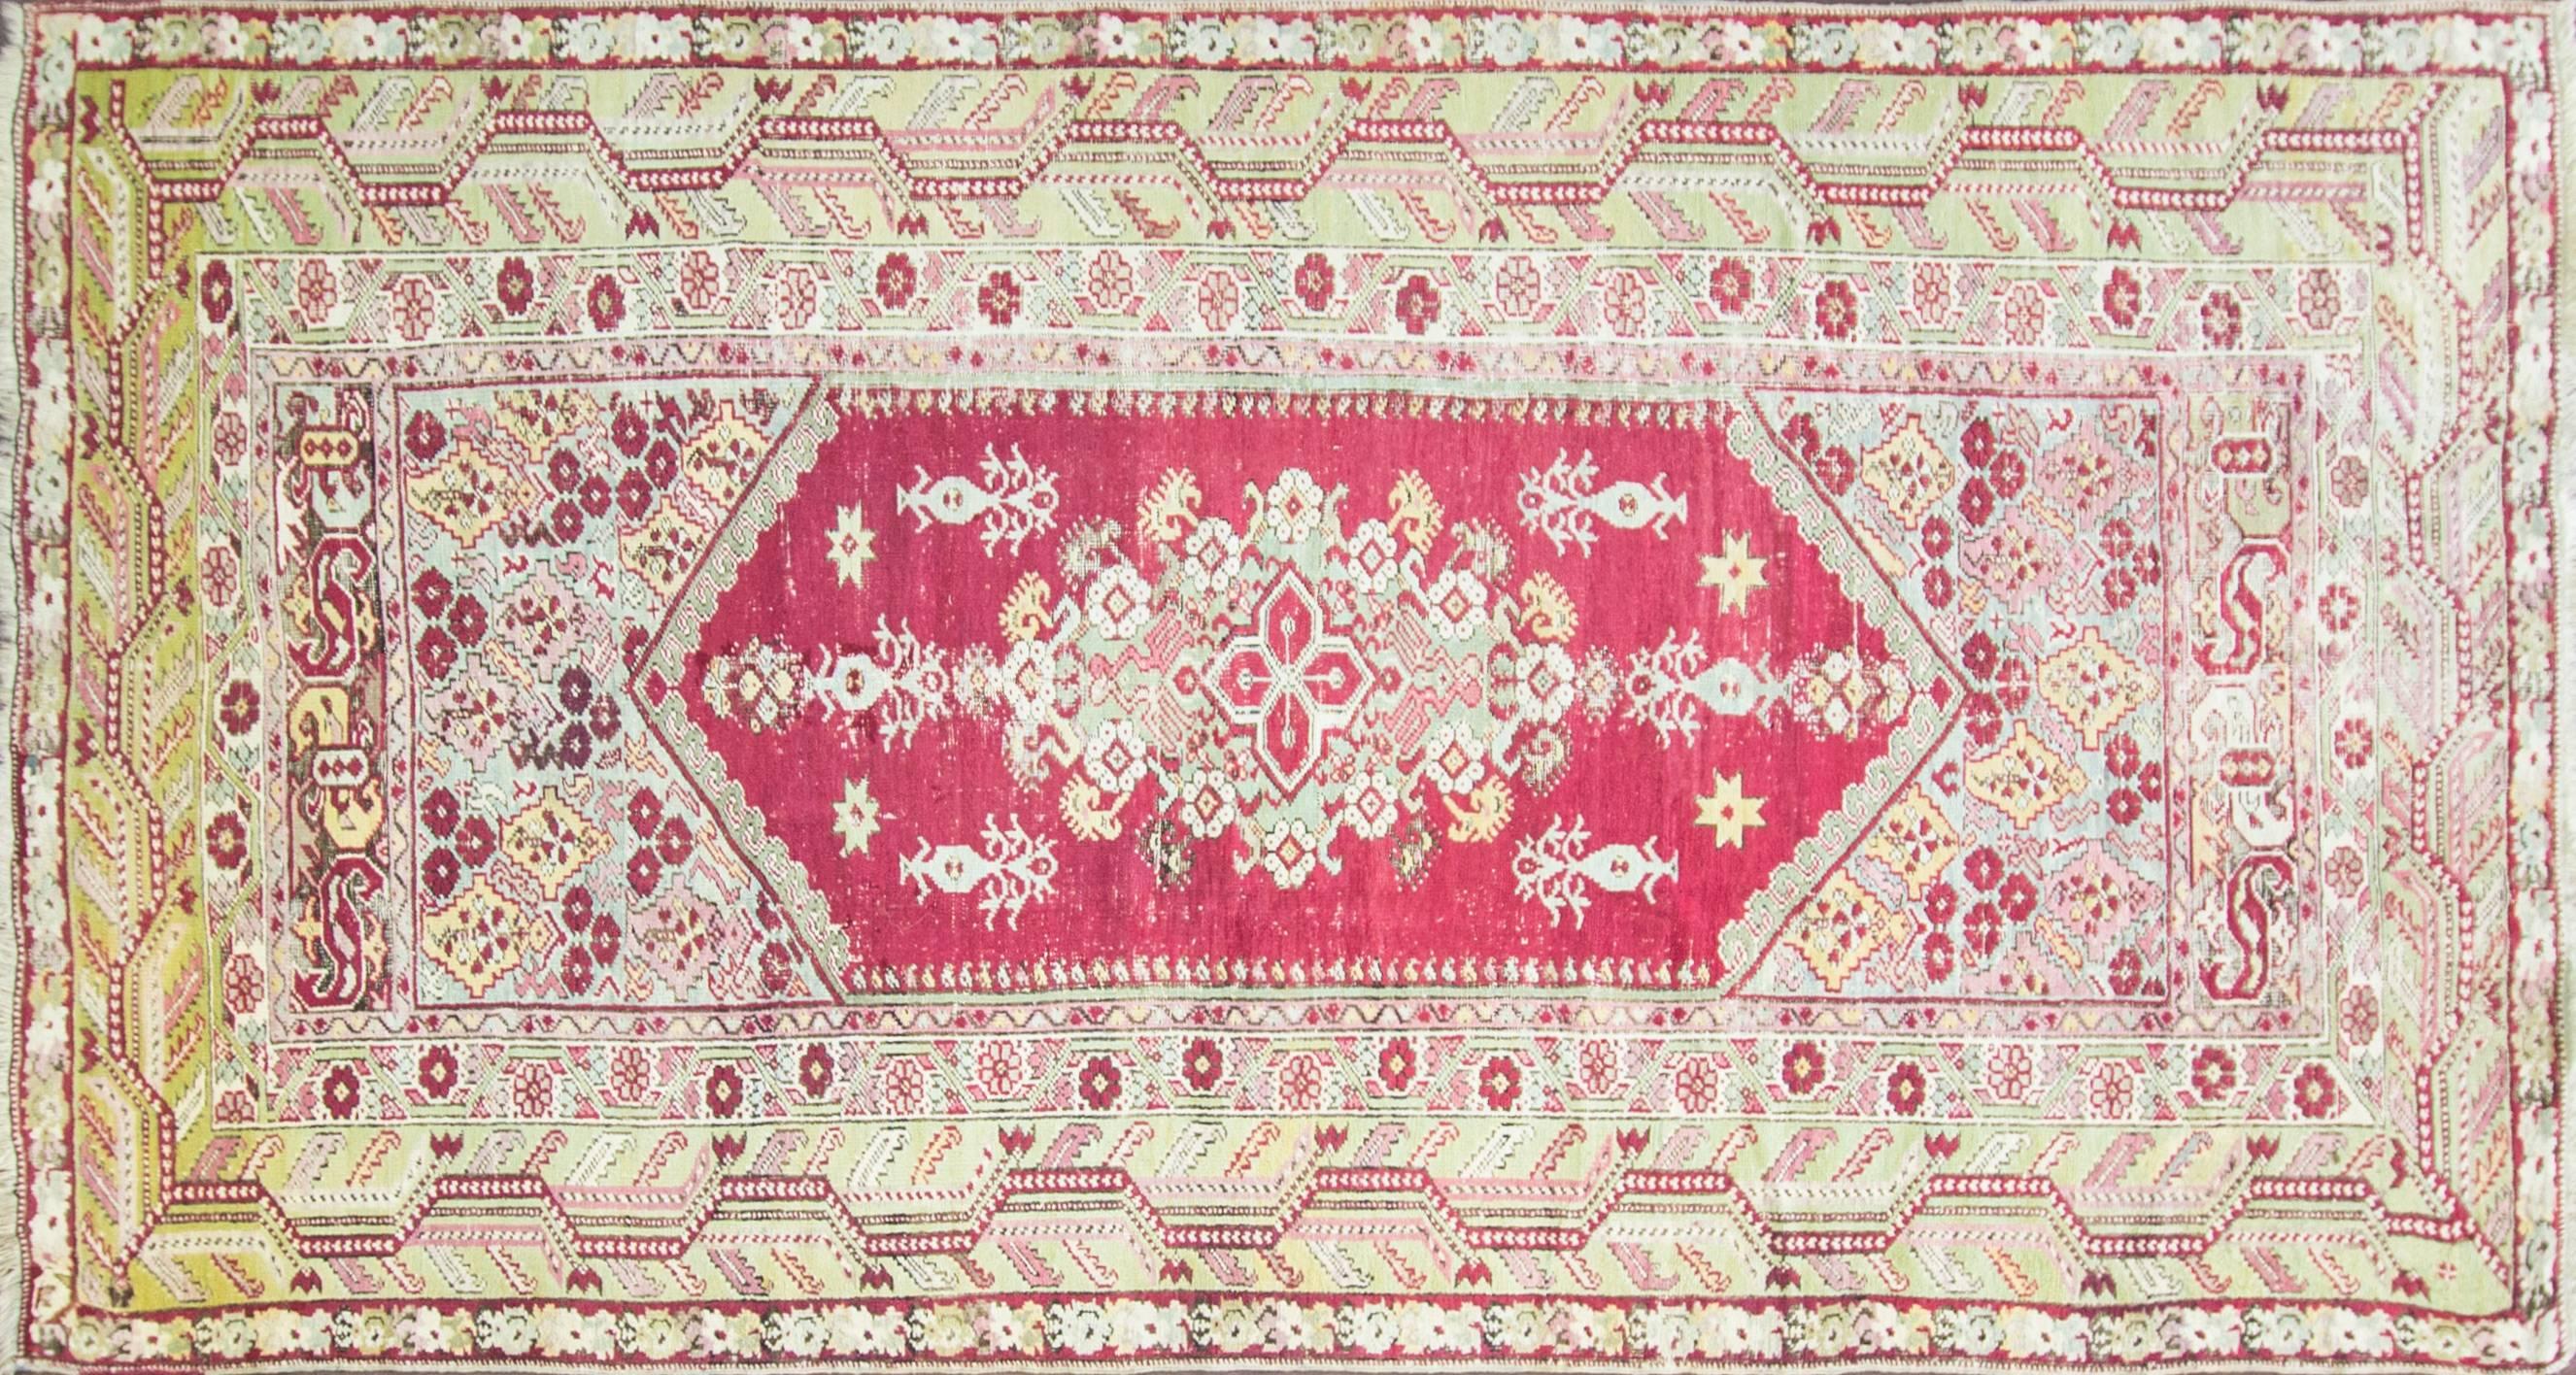 The Ghiordes captured the hearts of European collectors in the 1700s. Ture s, highly decorative spandrel and gorgeous monochromatic fields. These stunning rugs are typically made from the highest quality wool. This construction technique produces